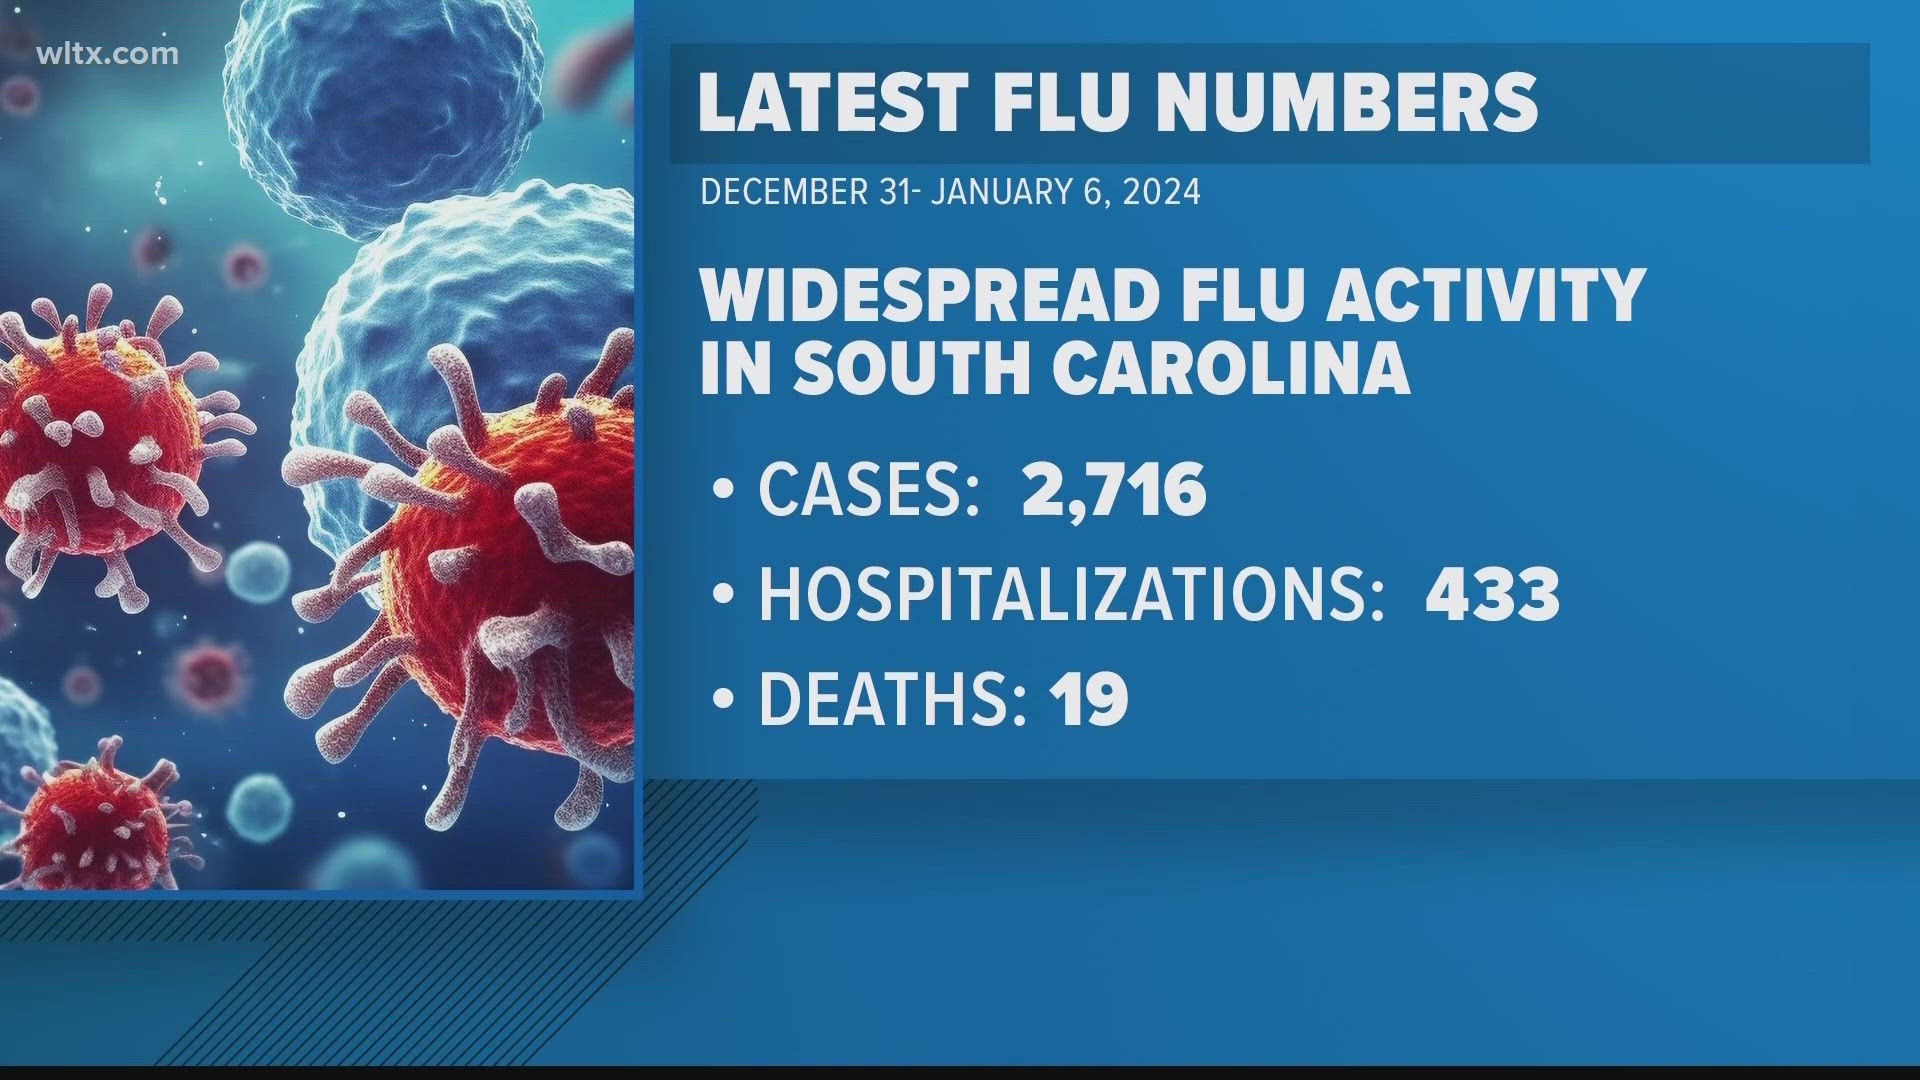 South Carolina still has one of the highest rates of infection in the country.